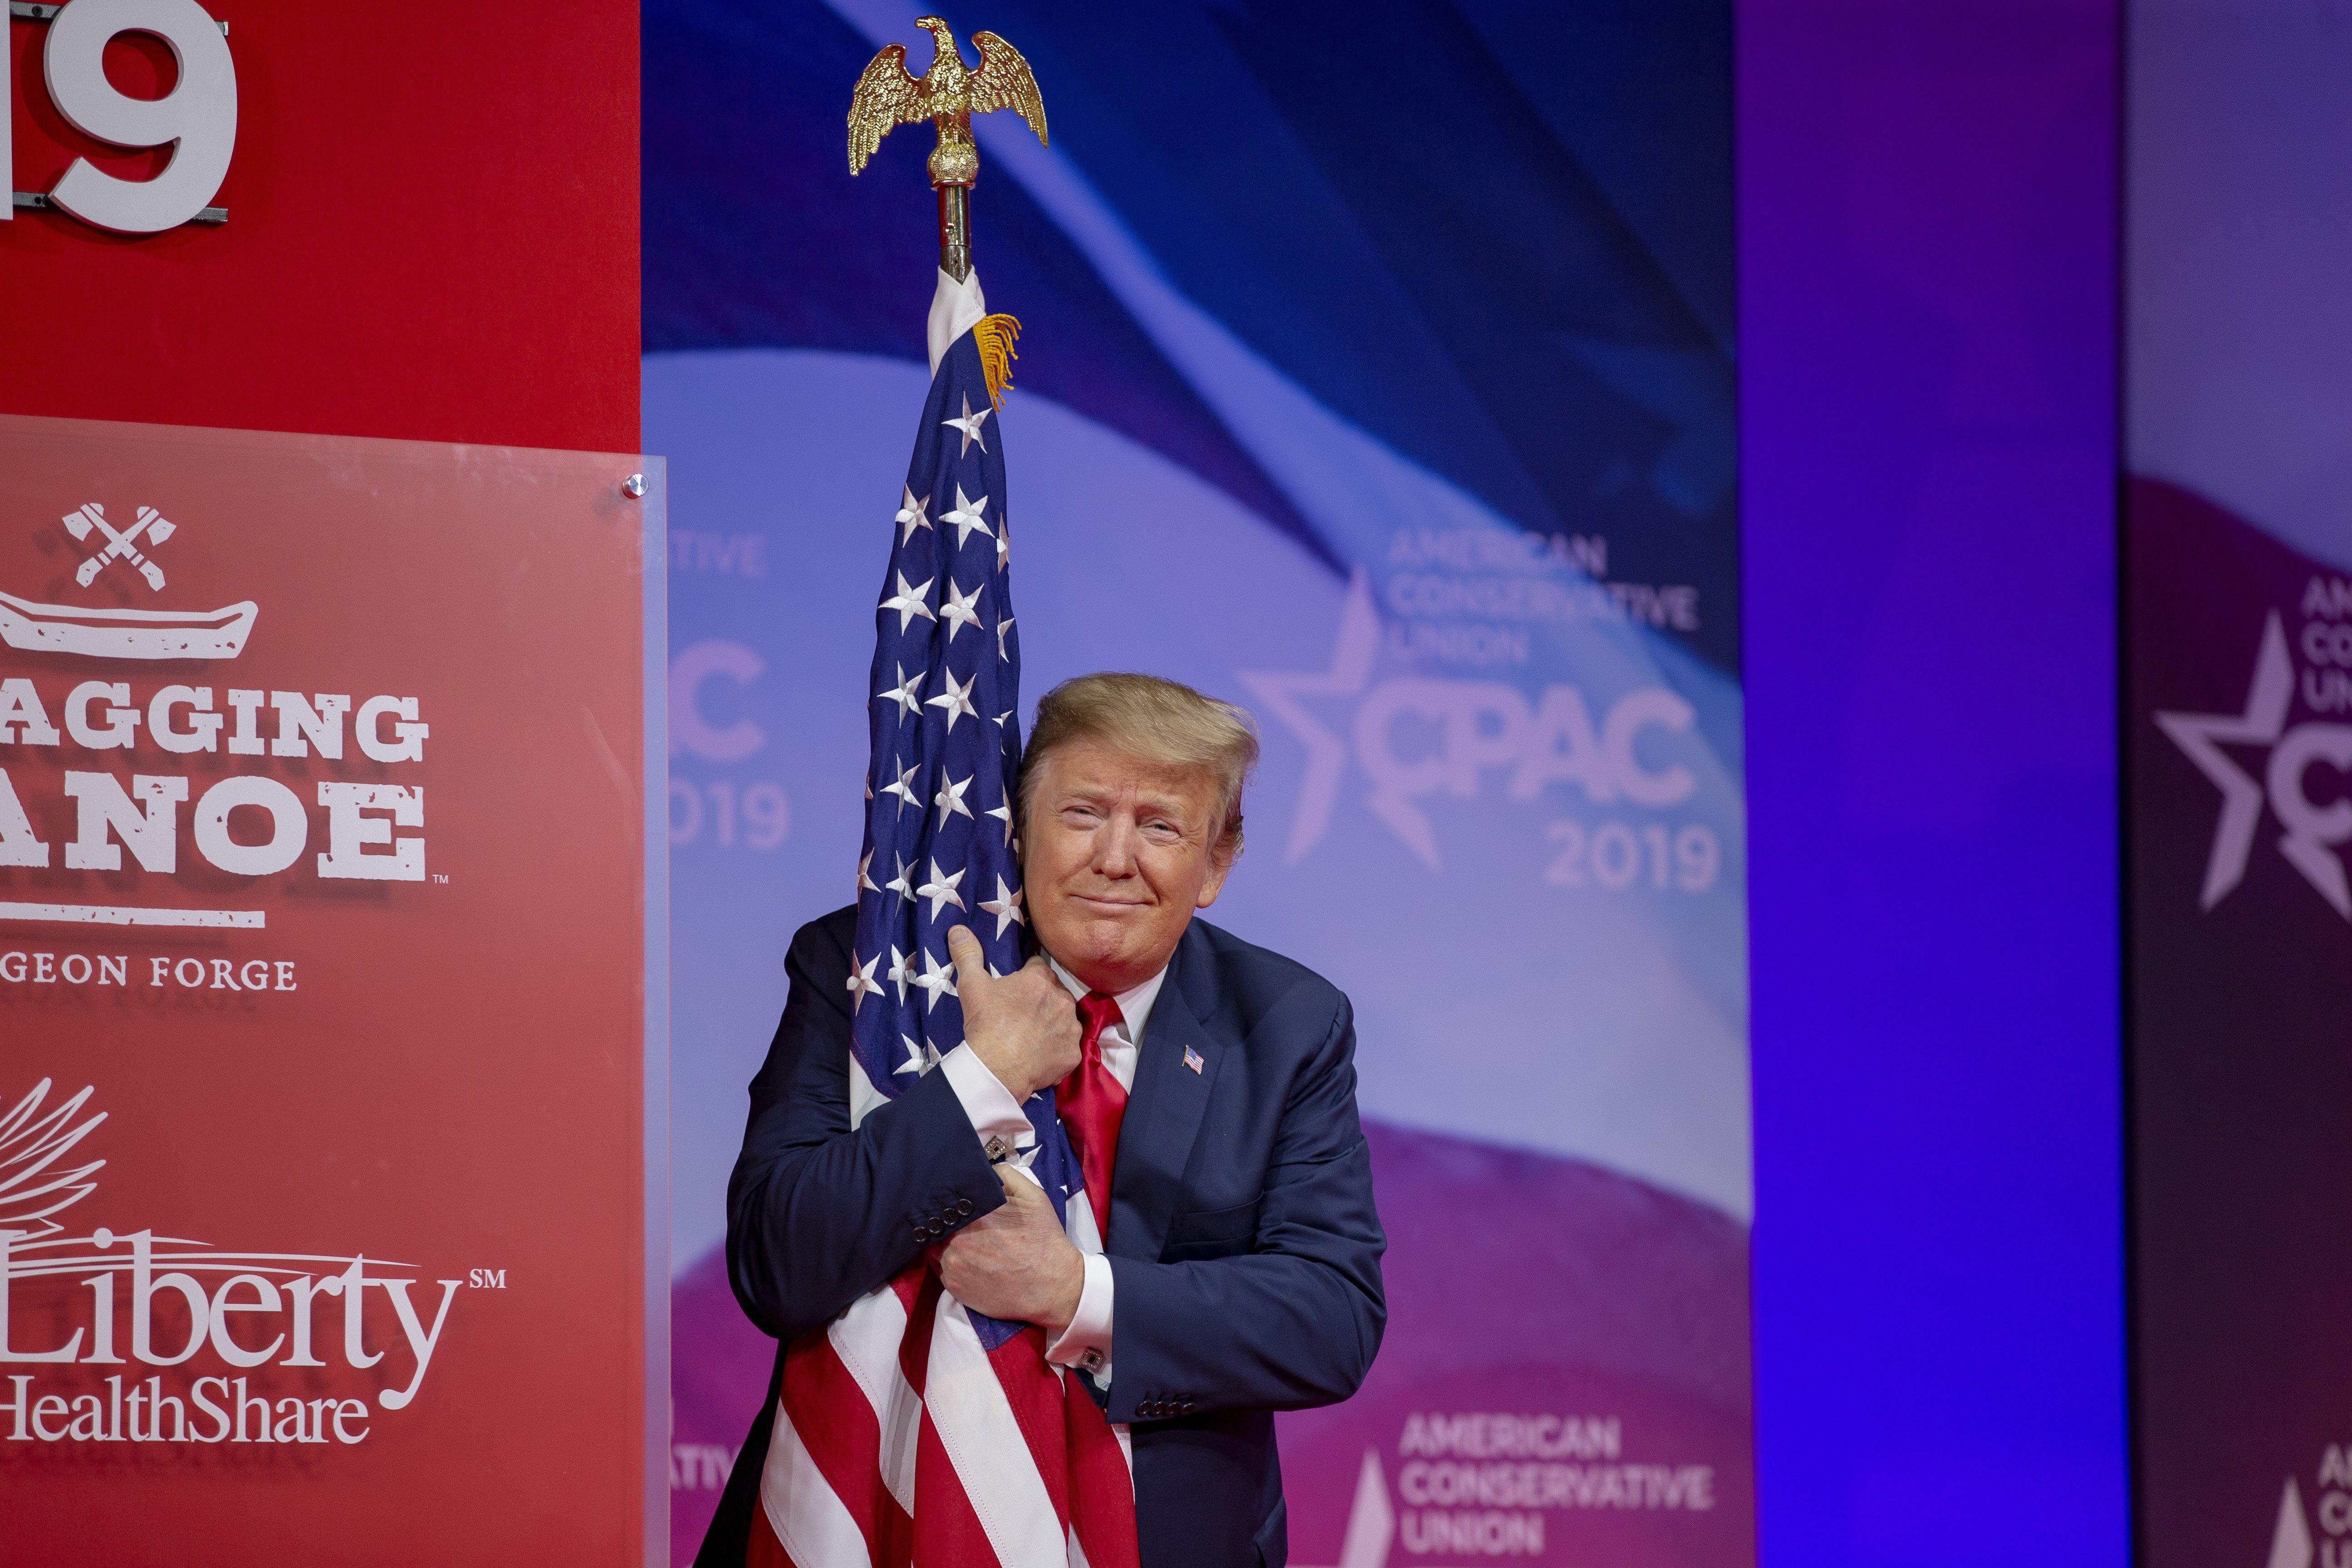 Donald Trump hugging the American flag at the 2019 CPAC in Maryland | Photo: Getty Images